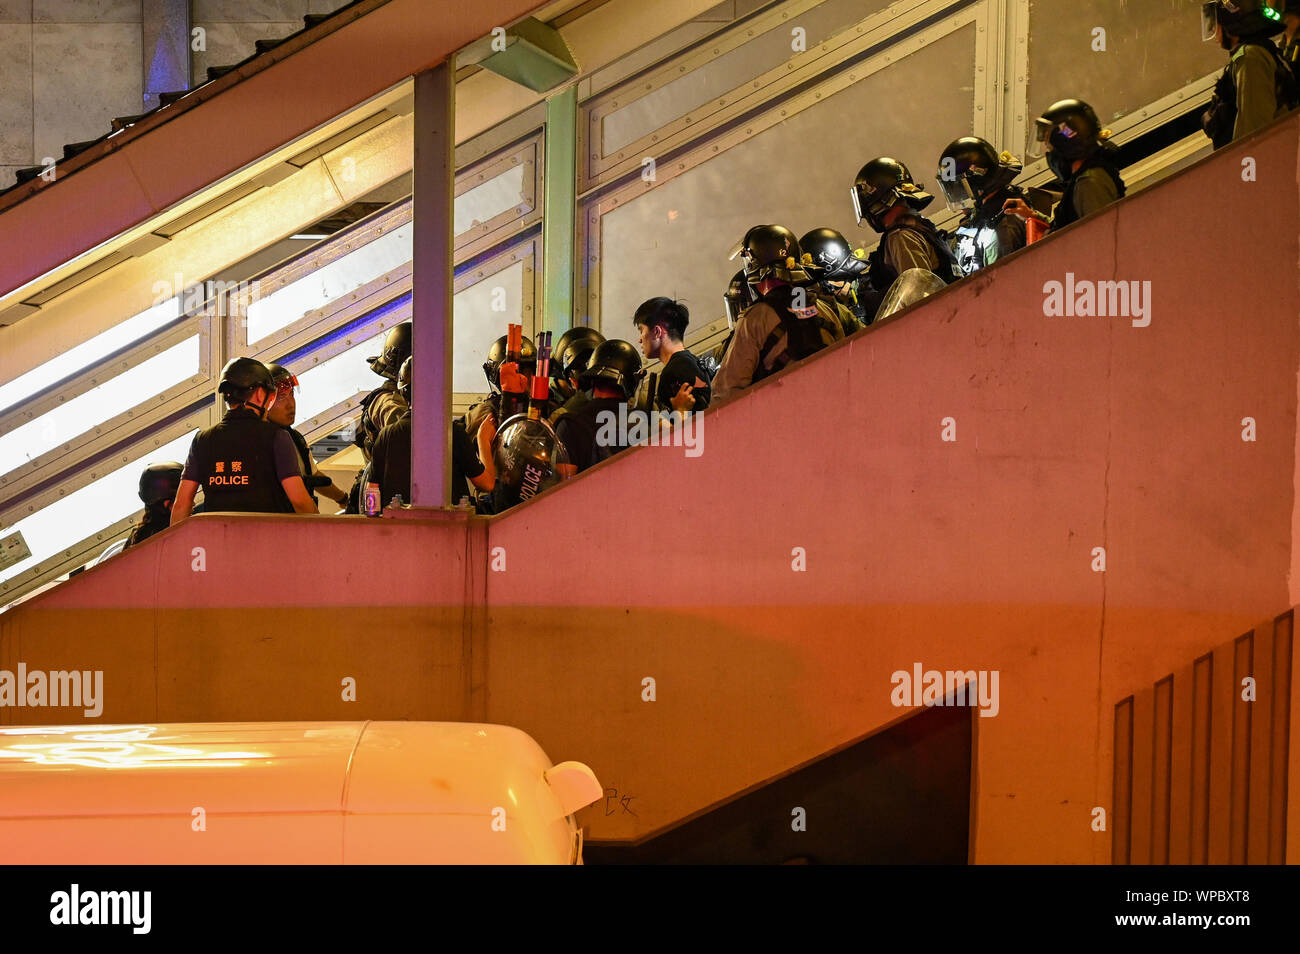 Hong Kong, China. 7th Sep 2019. Riot police make an arrest on a staircase in the Mong Kok area of Hong Kong on September 7, 2019, in order to clear crowds of protesters. Police and demonstrators have squared off with increasing frequency and violence as the summer has gone on. Photo by Thomas Maresca/UPI Credit: UPI/Alamy Live News Stock Photo